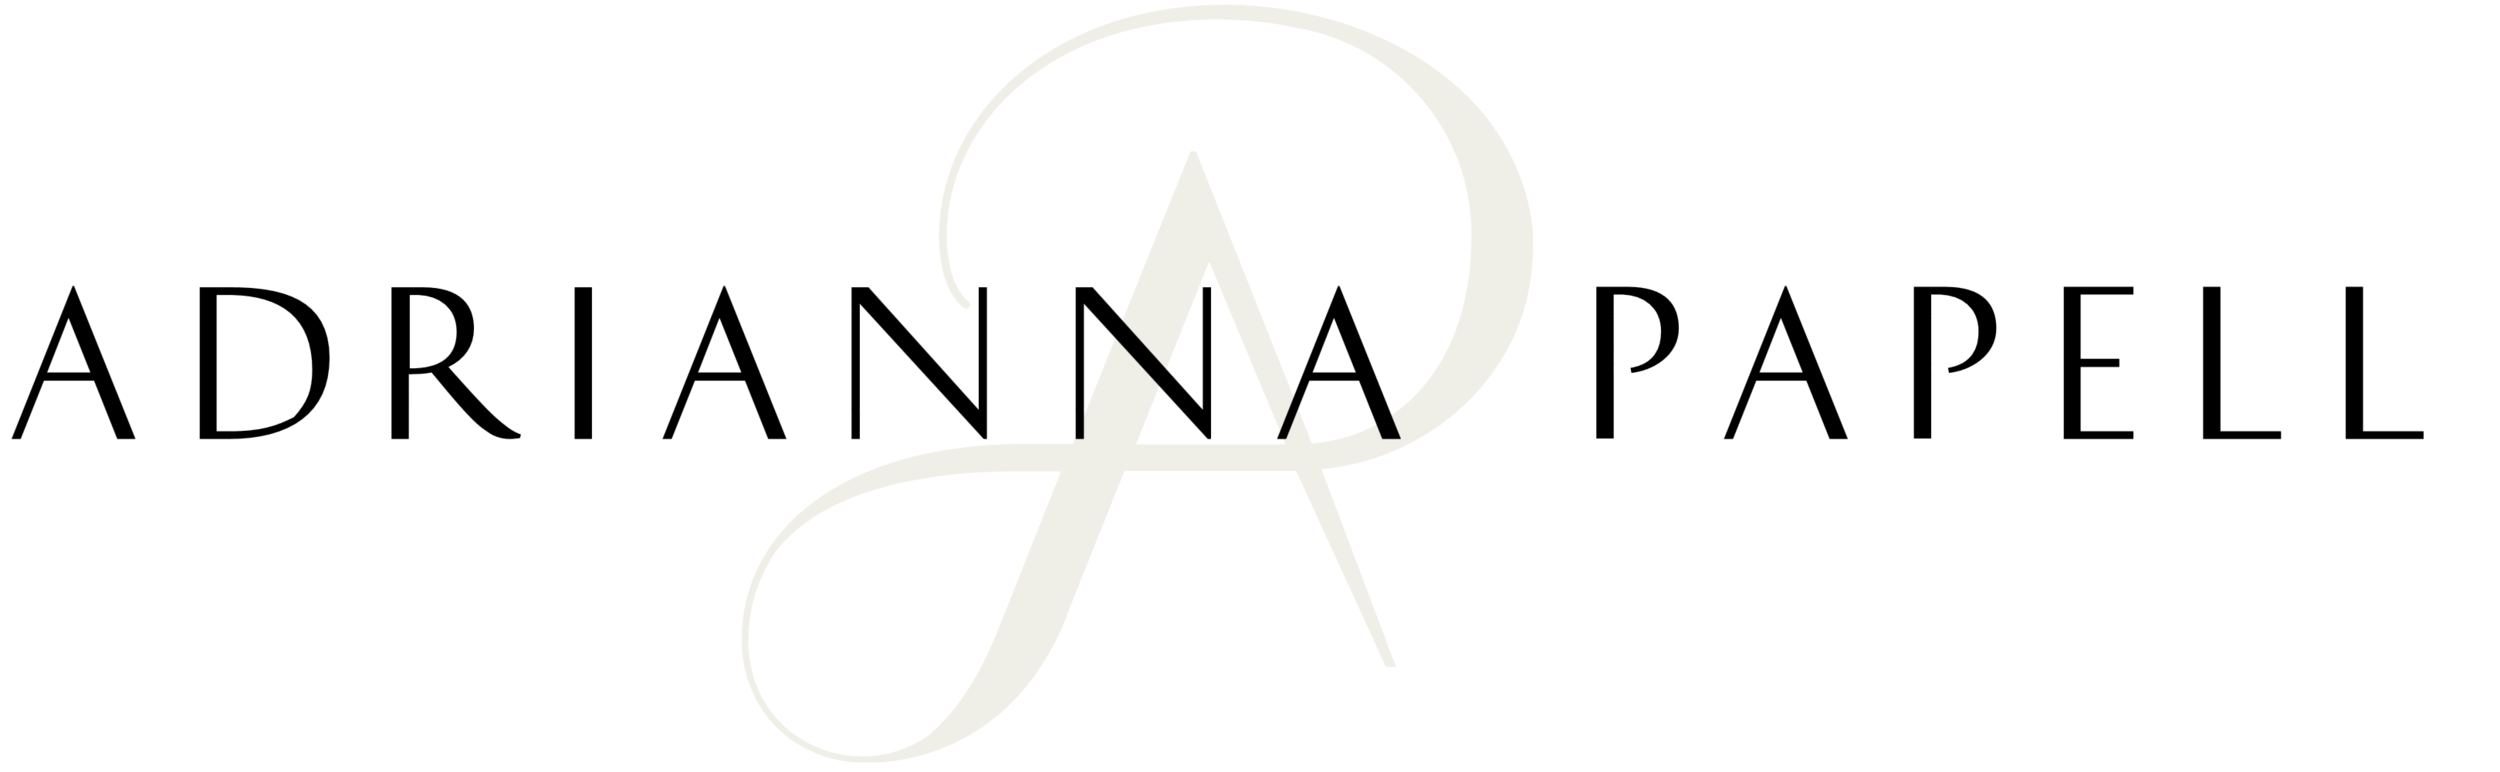 Adrianna_Papell_logo_logotype.png